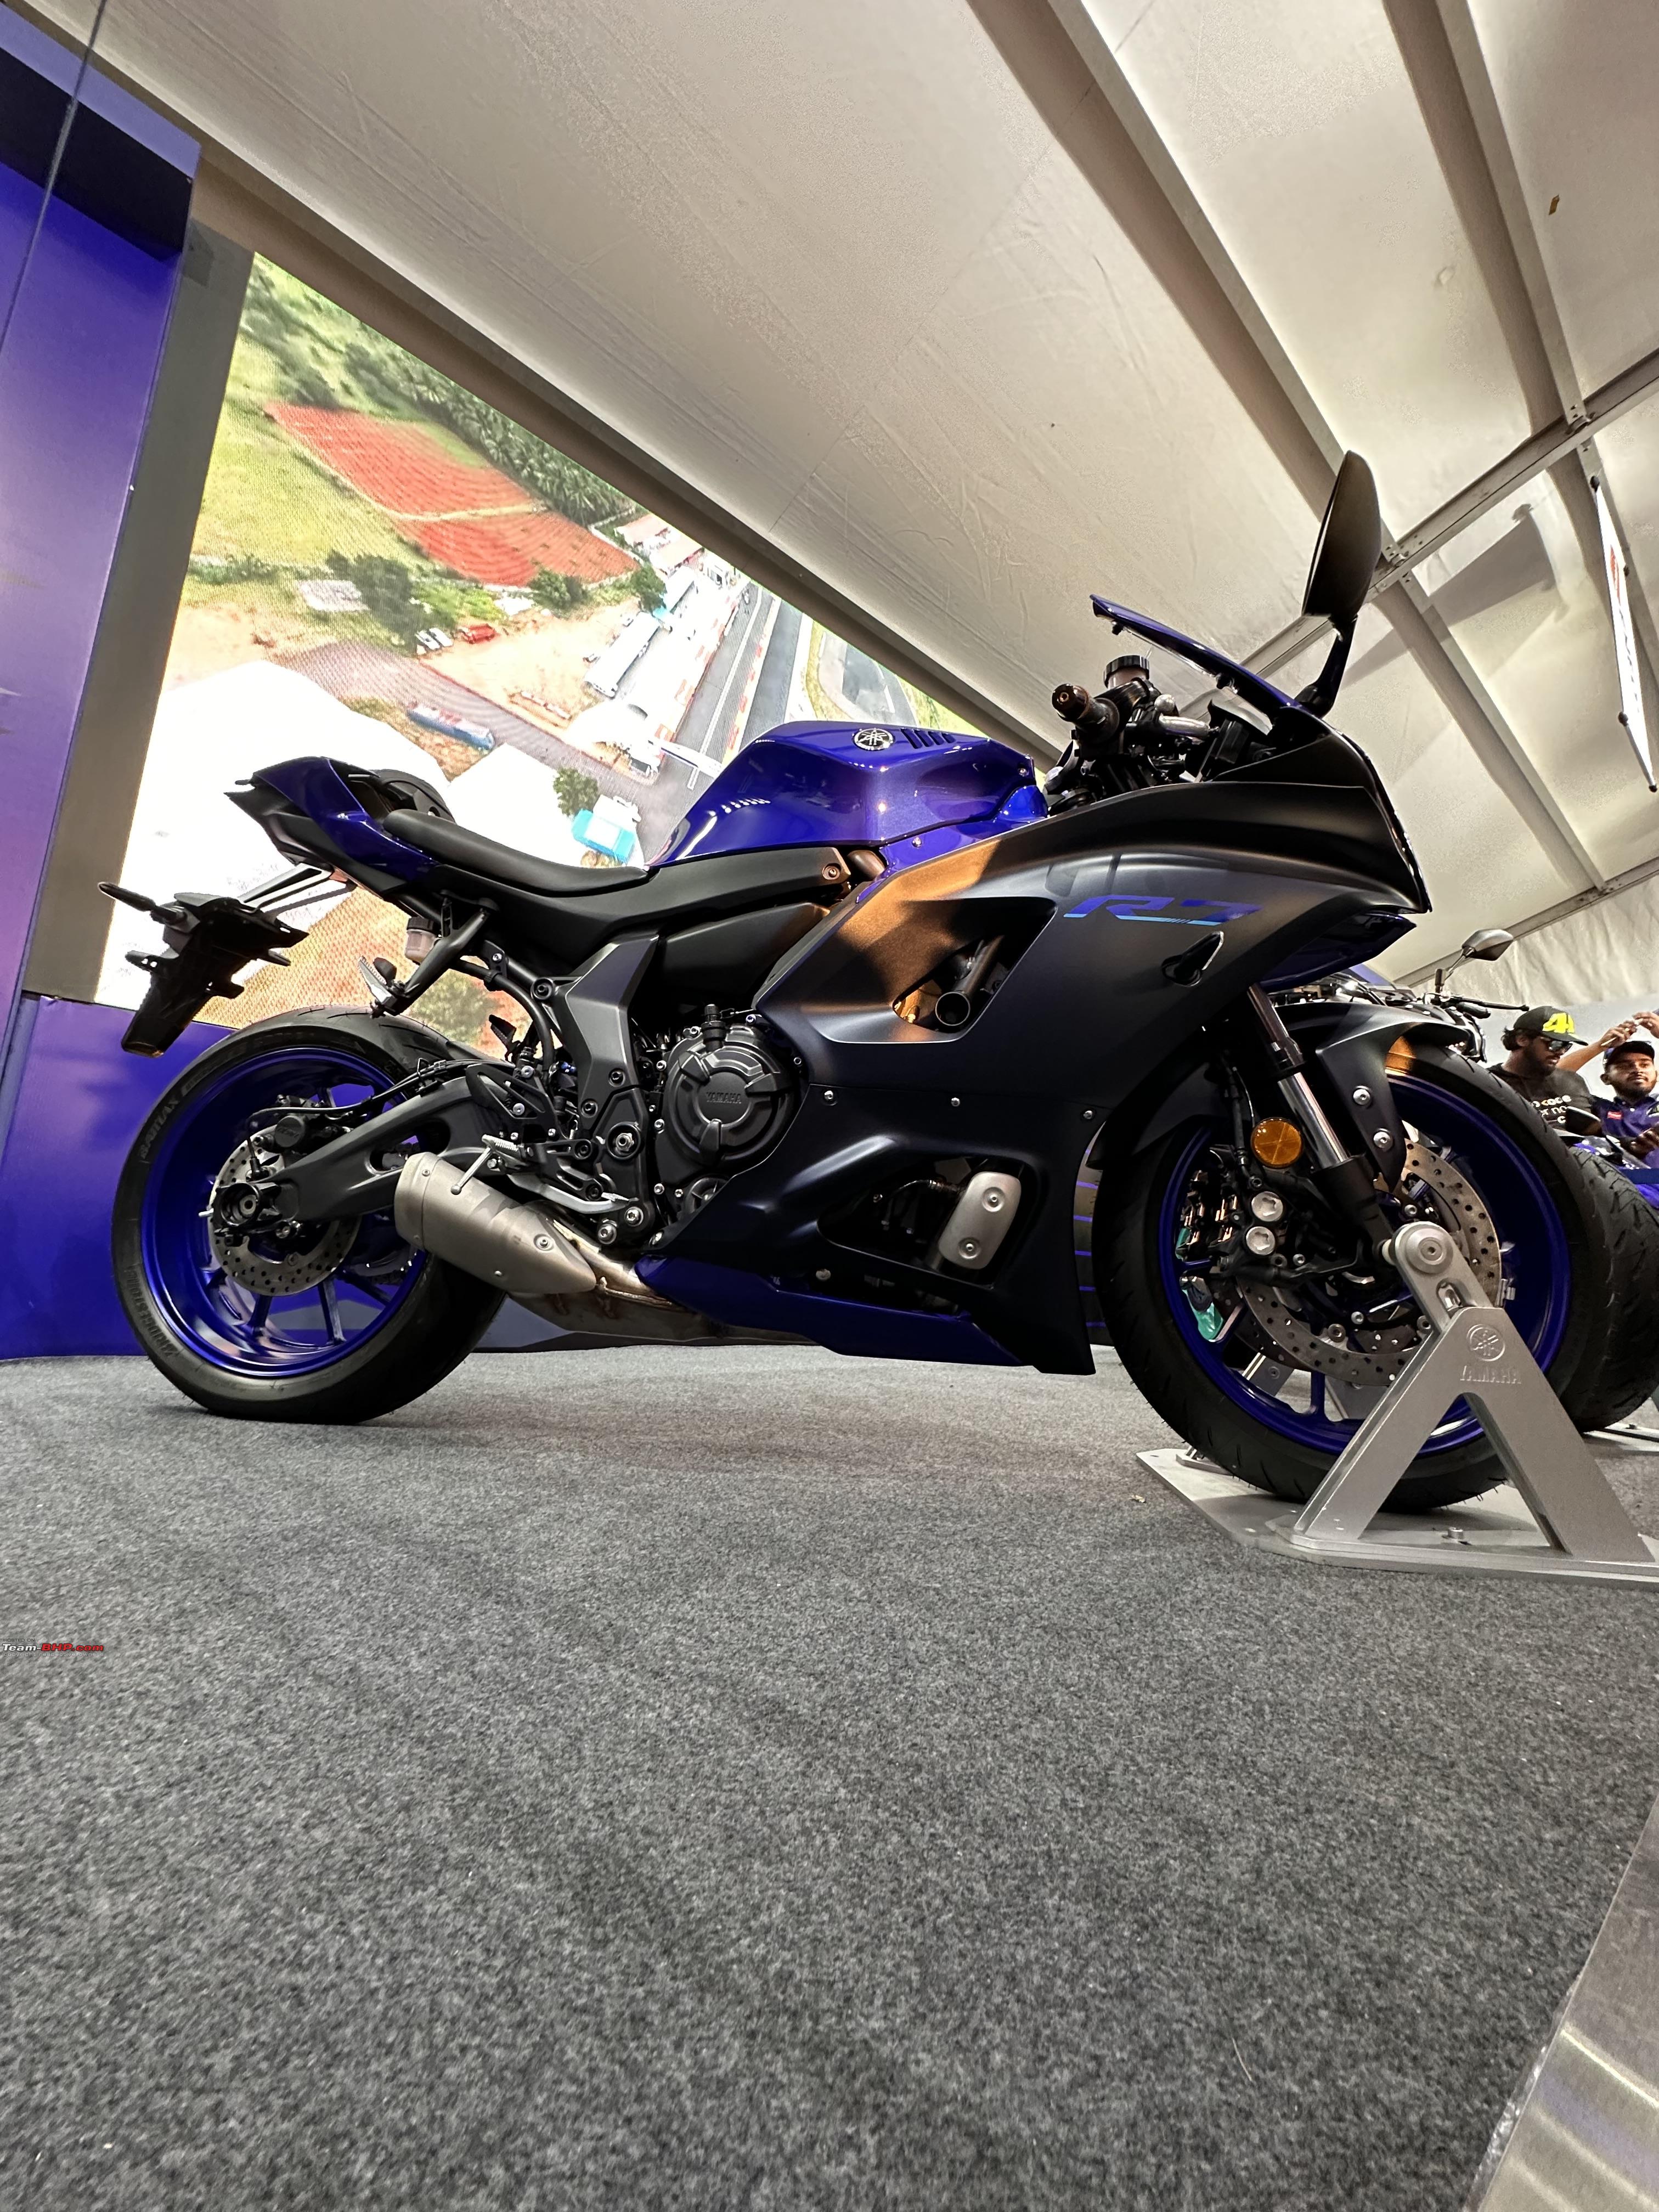 Yamaha R7 vs MT-07: Which Should You Buy? 